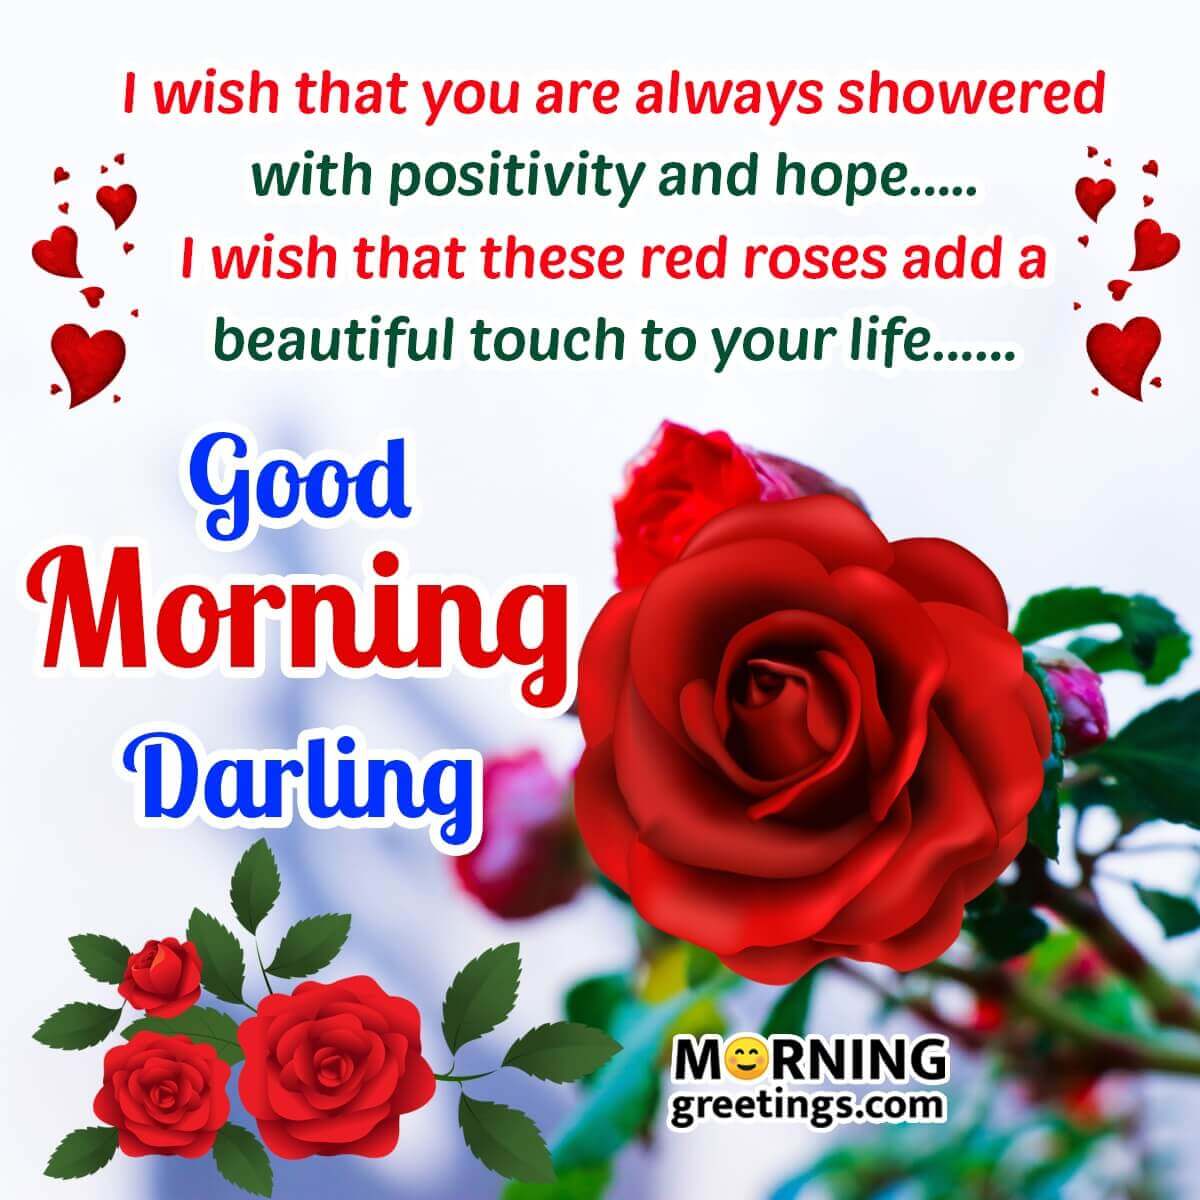 Good Morning Red Roses Wishing Pic For Darling